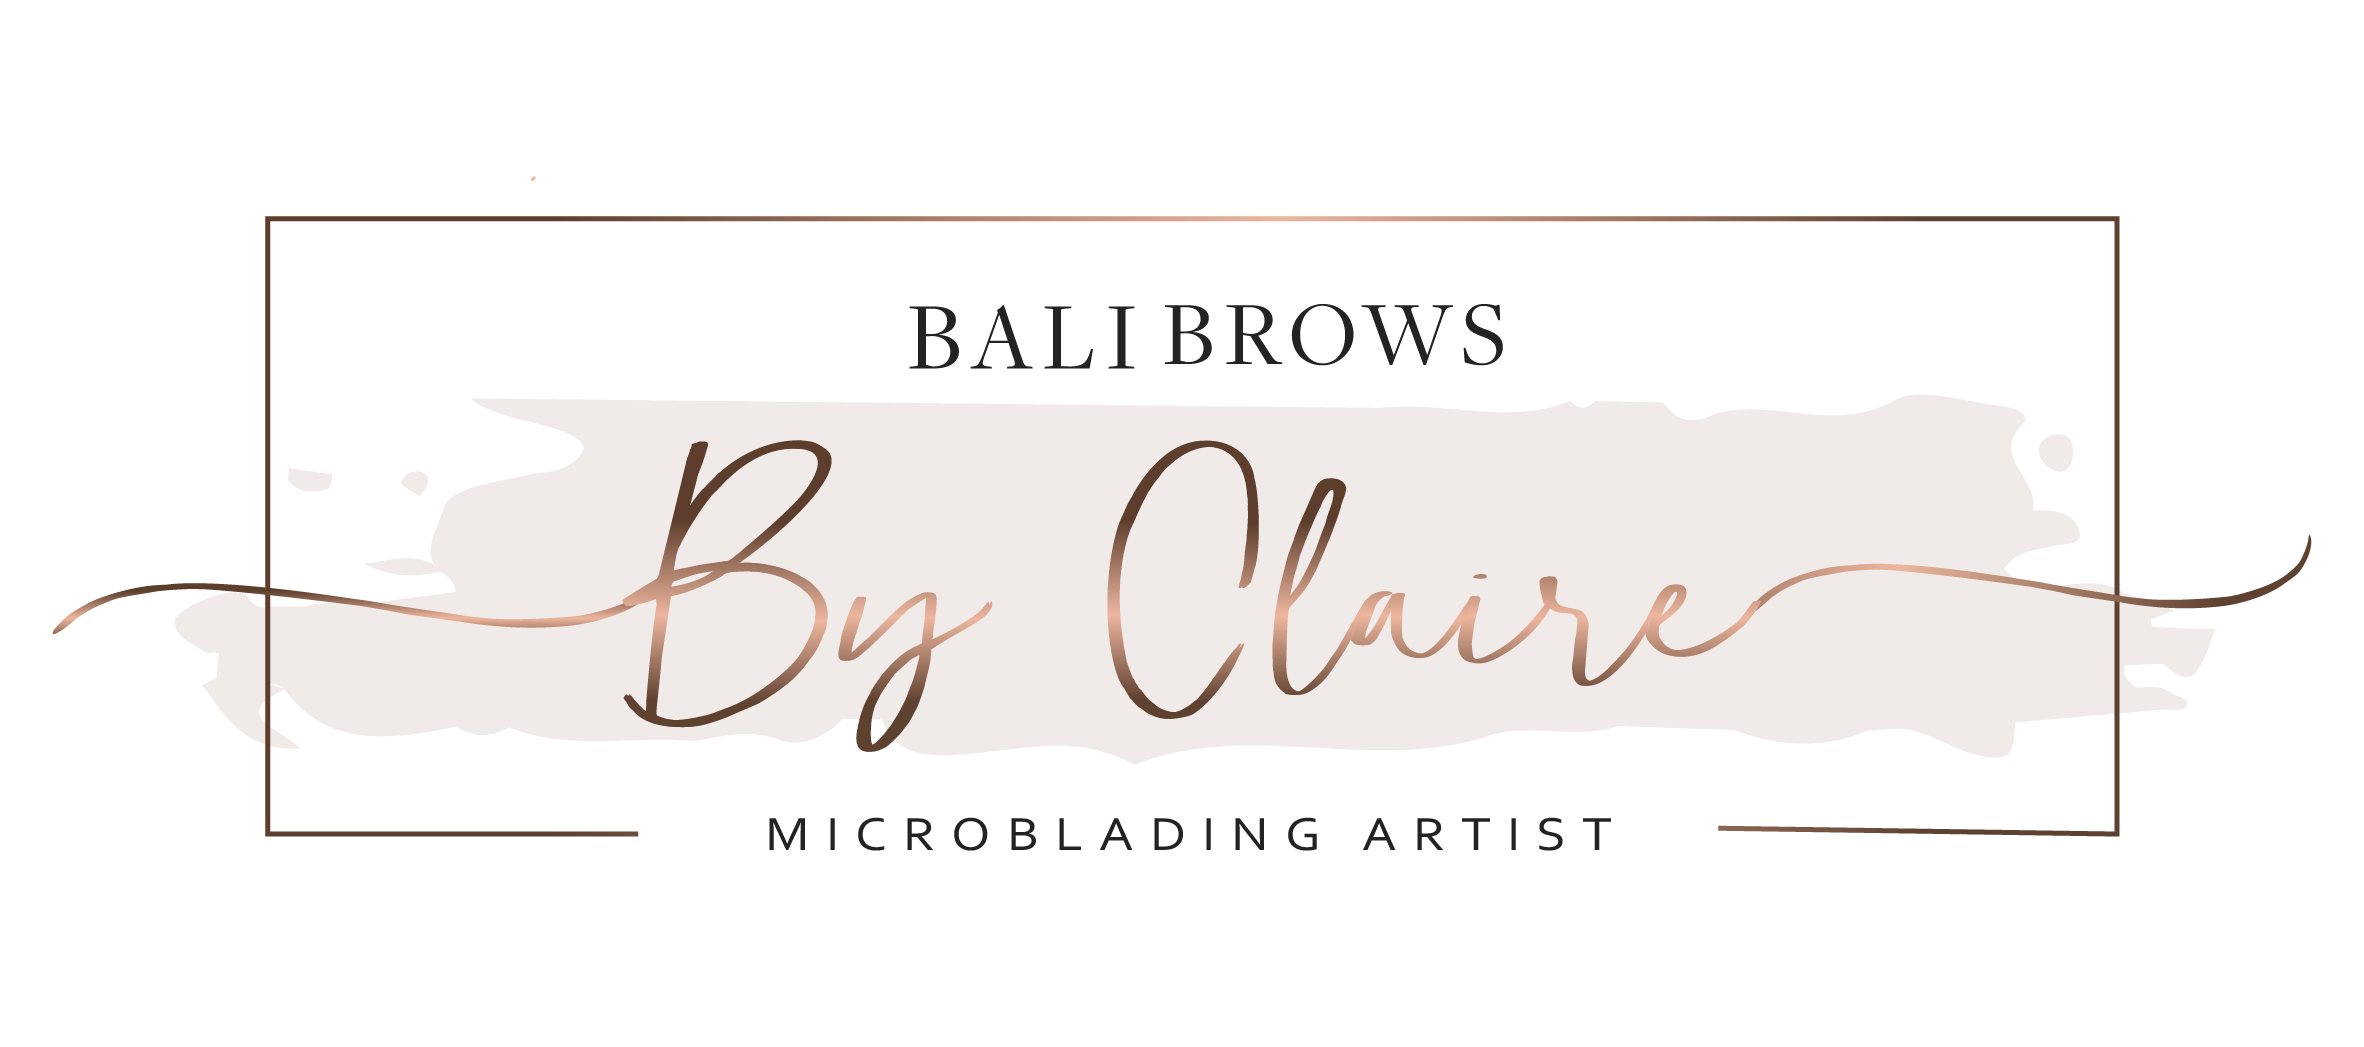 balibrowsbyclaire logo